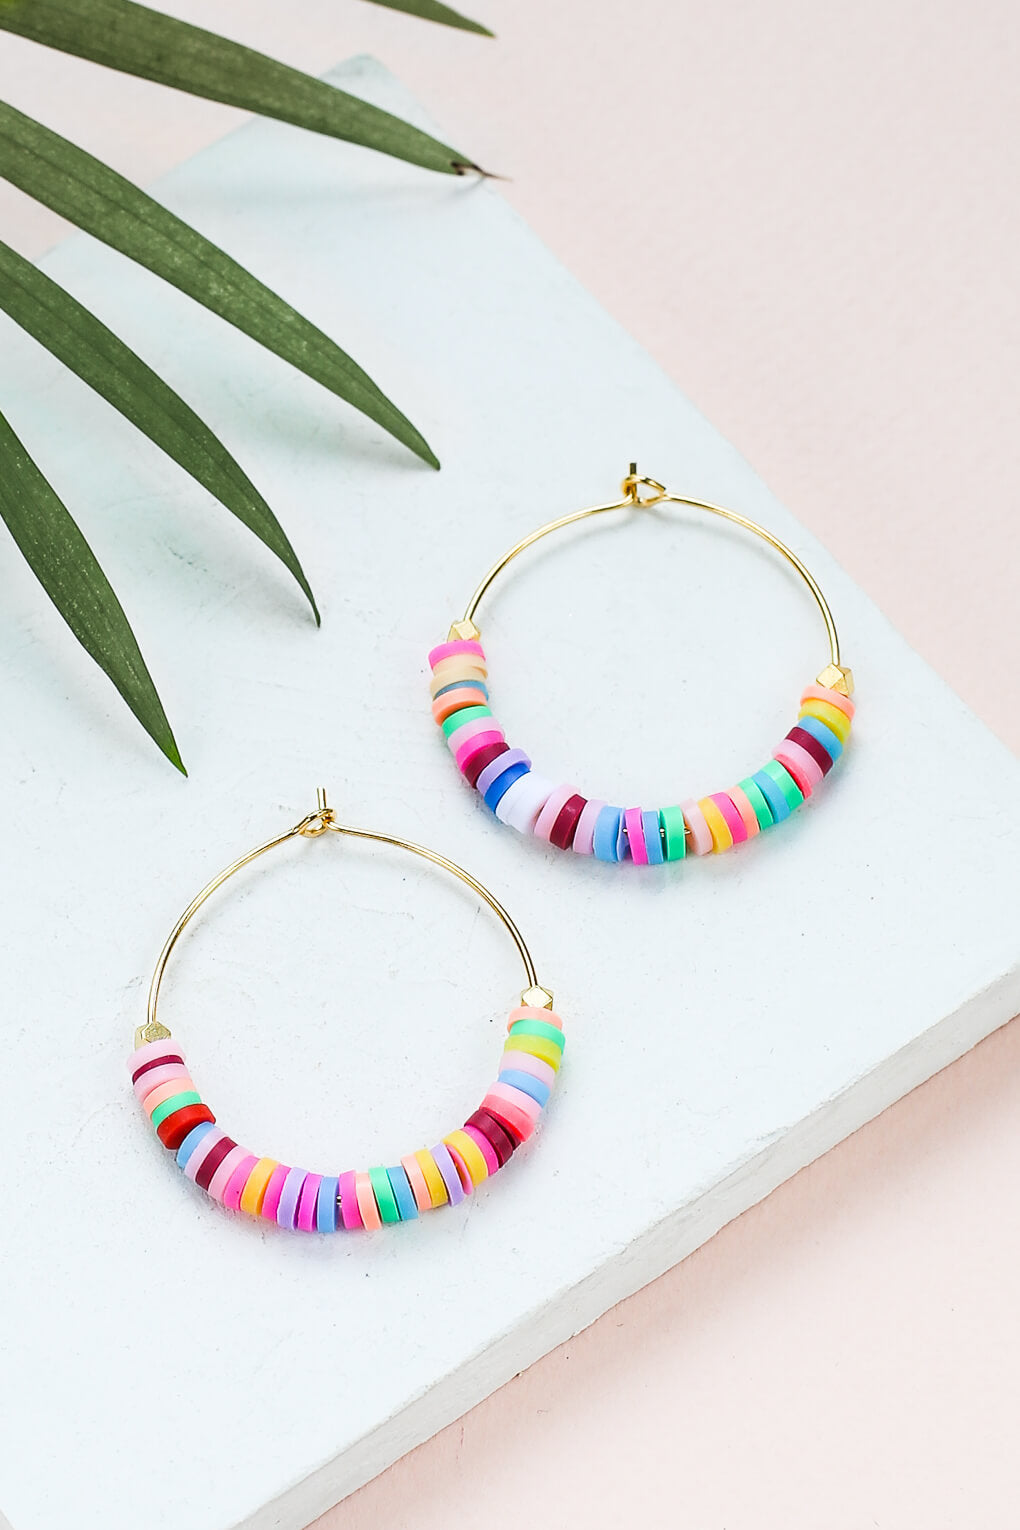 - Hoop earrings decorated with colorful silicone beads, 30 mm in